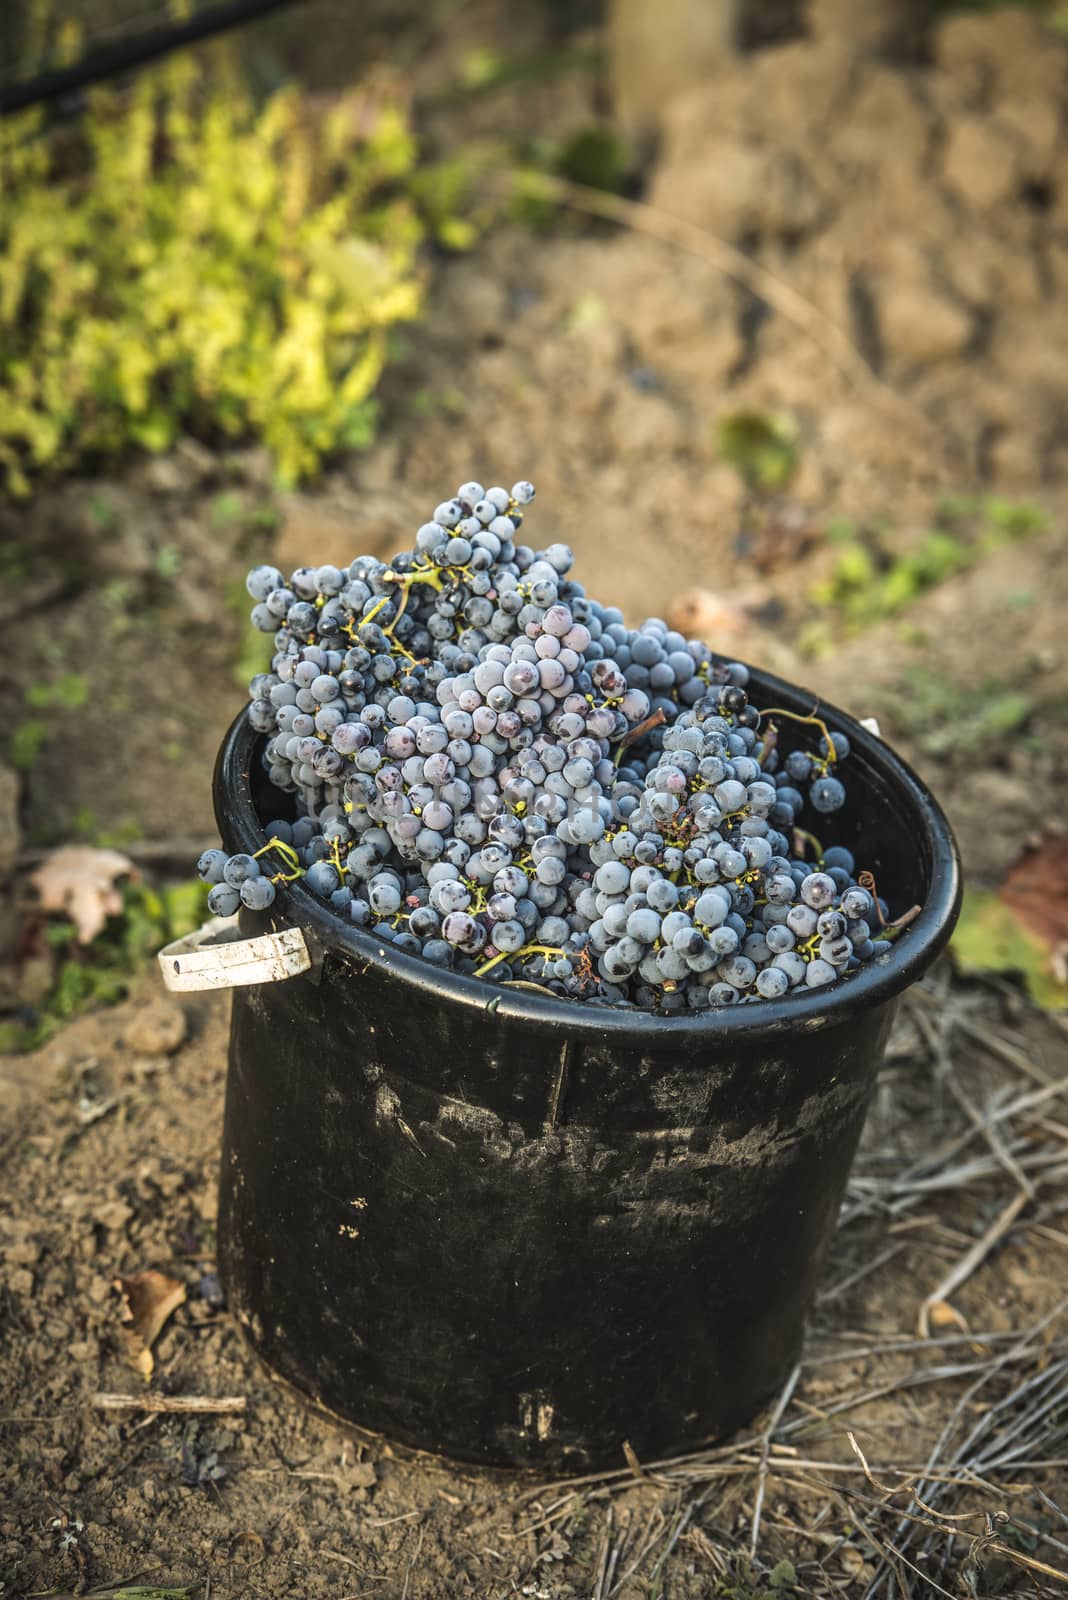 Bucket full of grapes picked for making wine